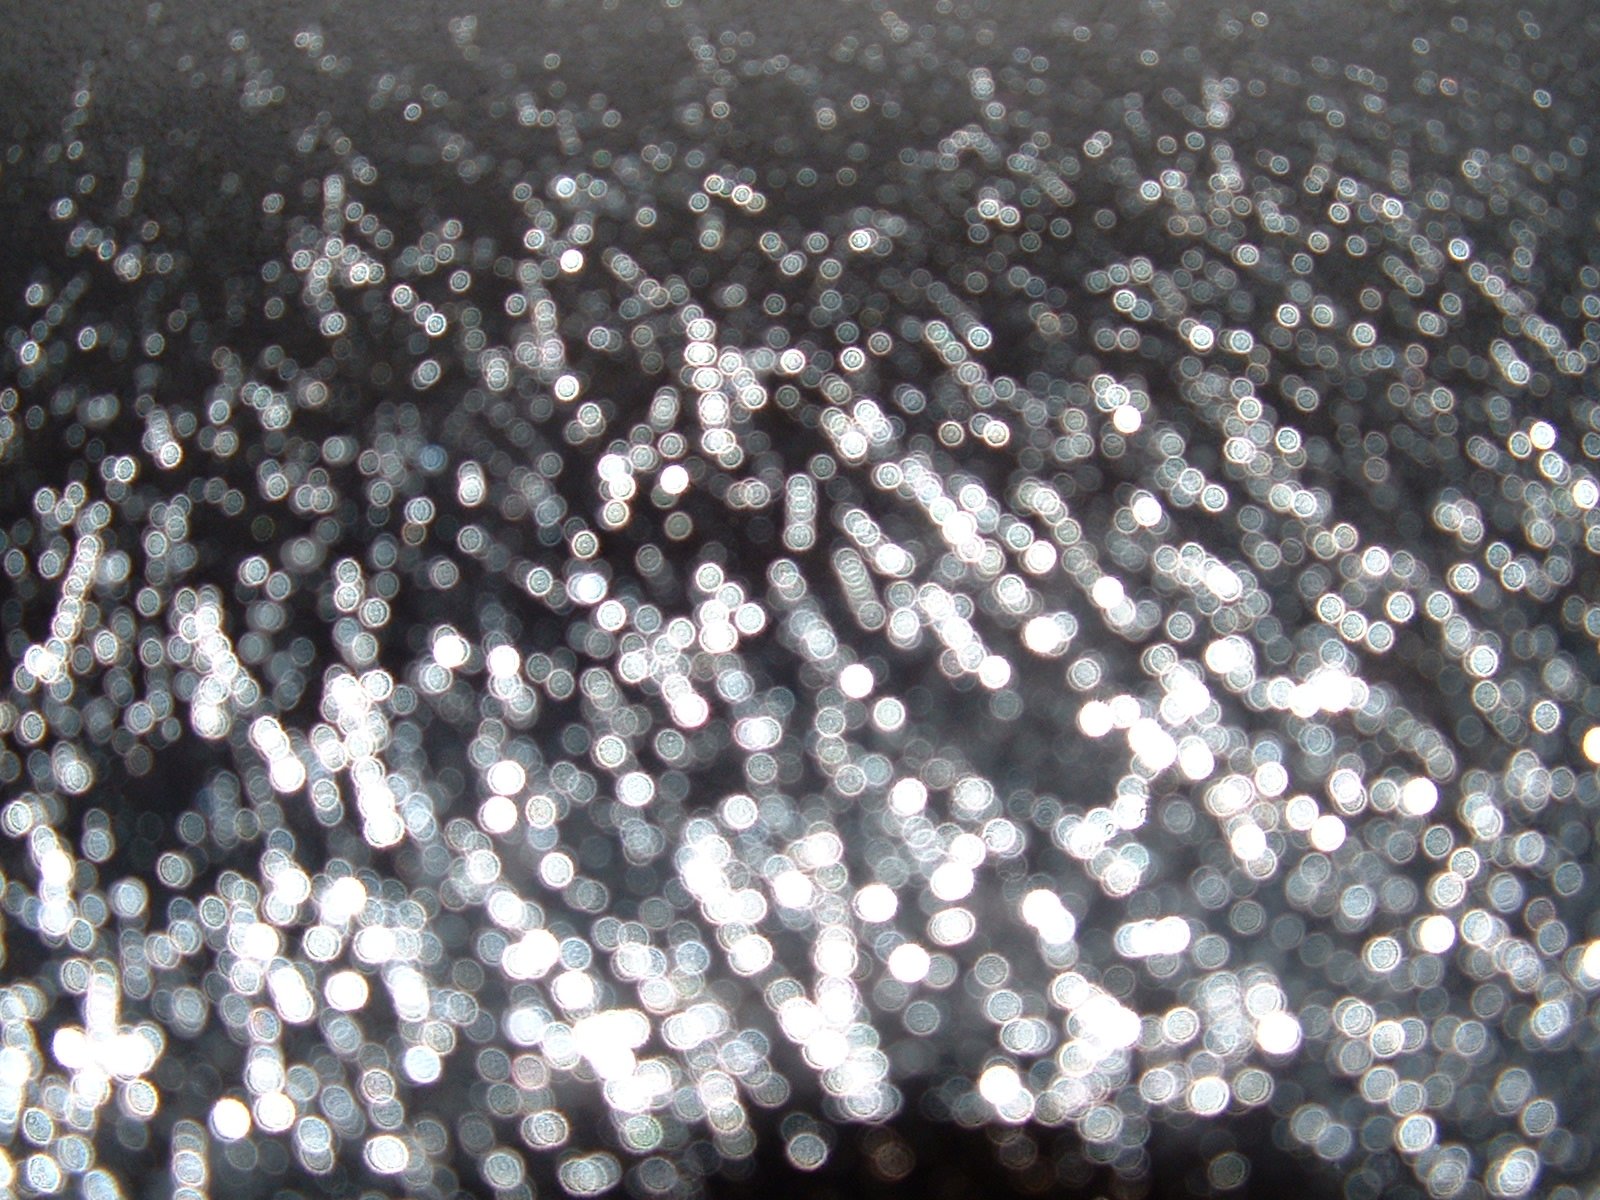 a very blurry picture of white water droplets